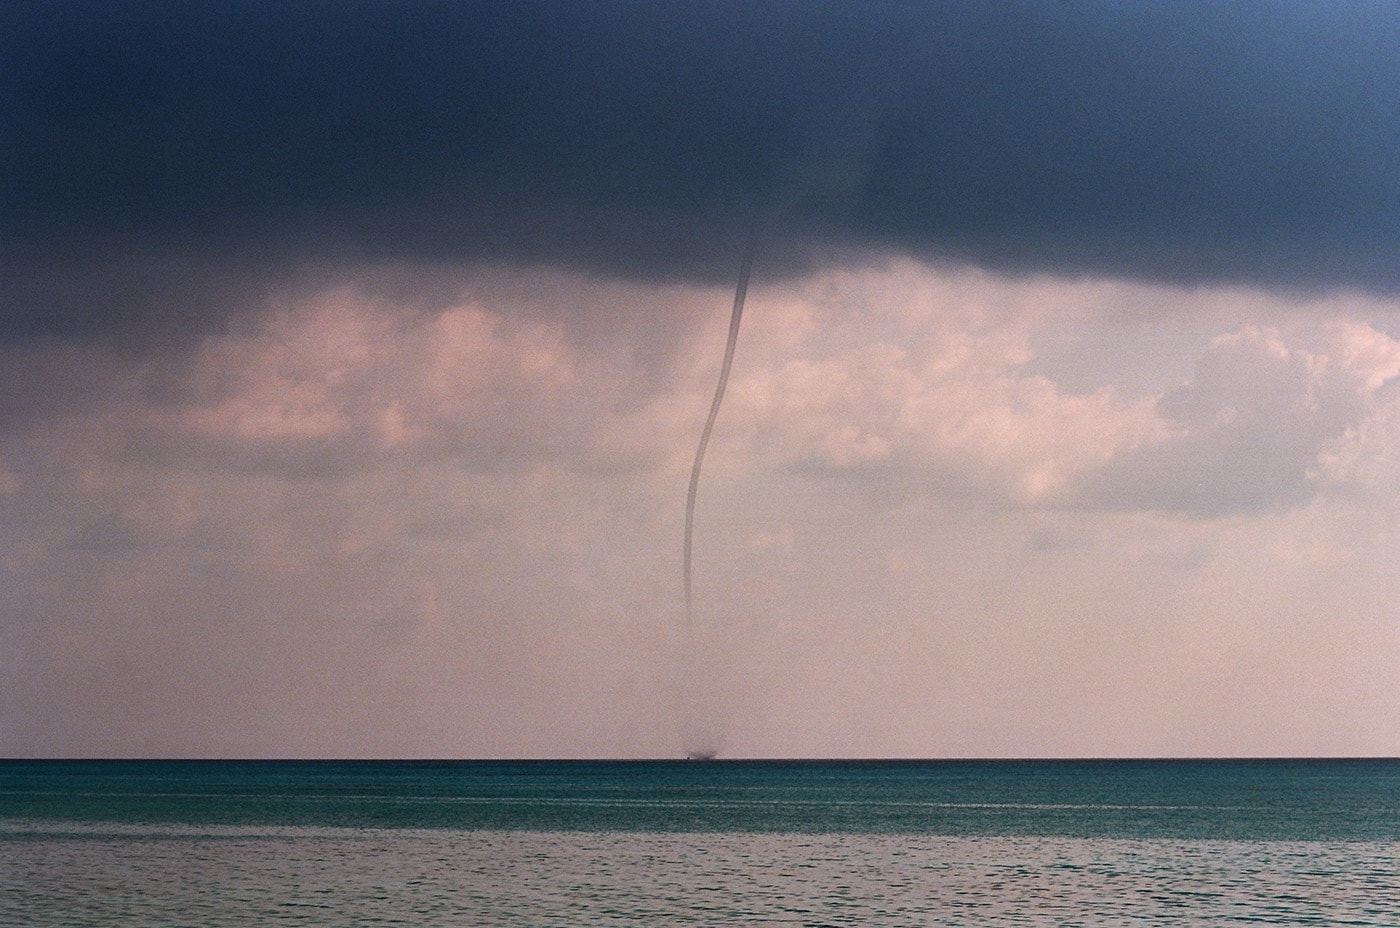 Tropical Nature: Waterspout In The Ocean Near Maldives